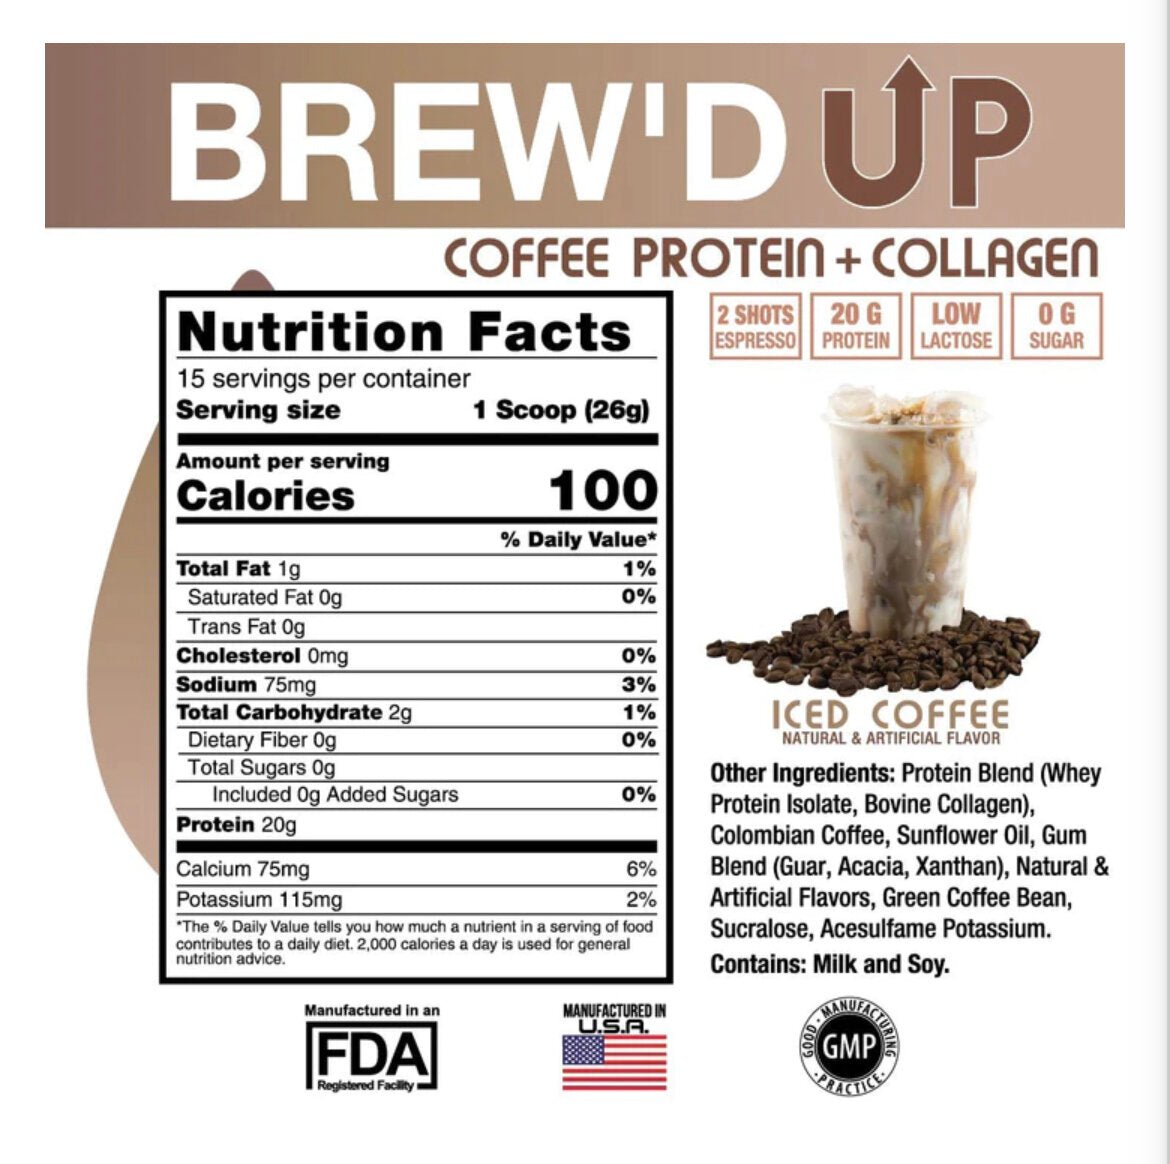 SweatEthic- Brew’d Up- Coffee Protein + Collagen 15 Servings - Krazy Muscle Nutrition vendor-unknownSQ8266005